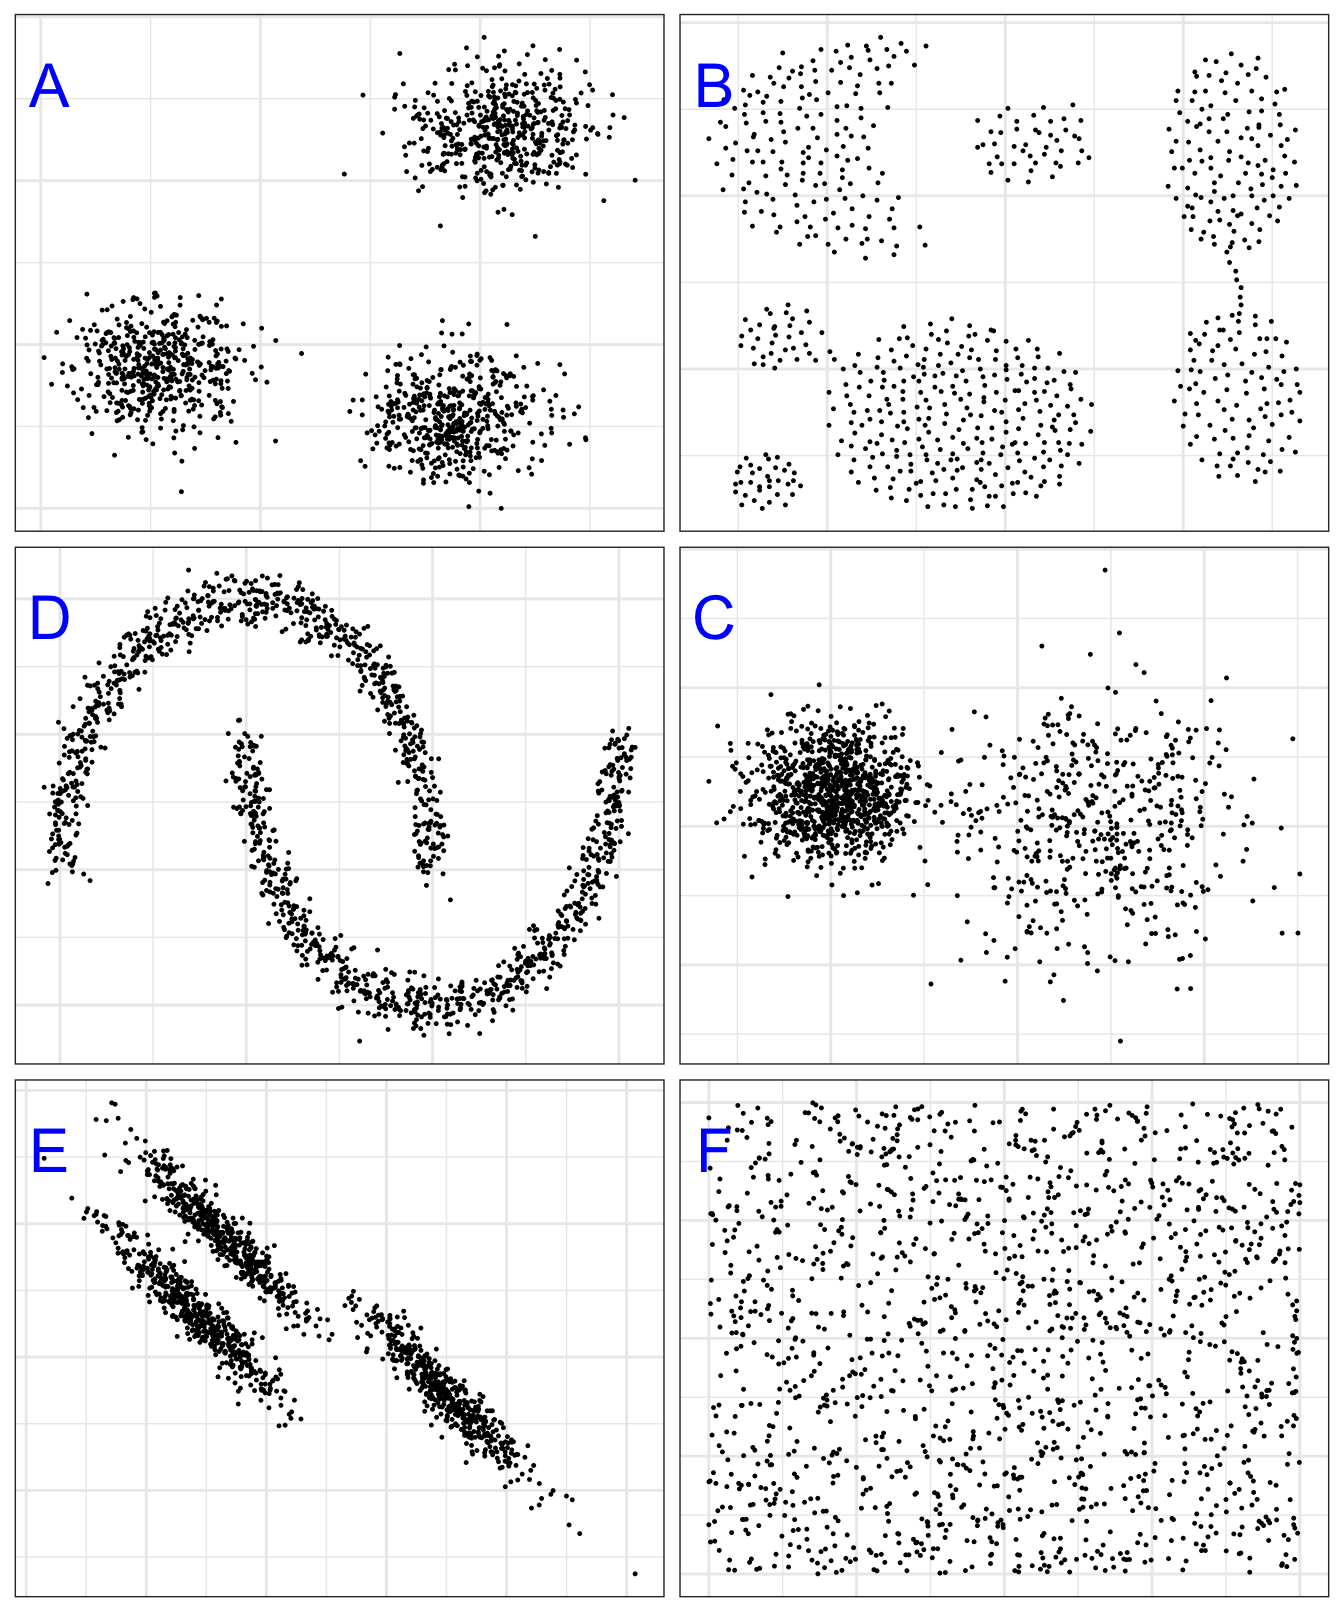 Example clusters. **A**, *blobs*; **B**, *aggregation* [@Gionis2007]; **C**, *noisy moons*; **D**, *different density*; **E**, *anisotropic distributions*; **F**, *no structure*.